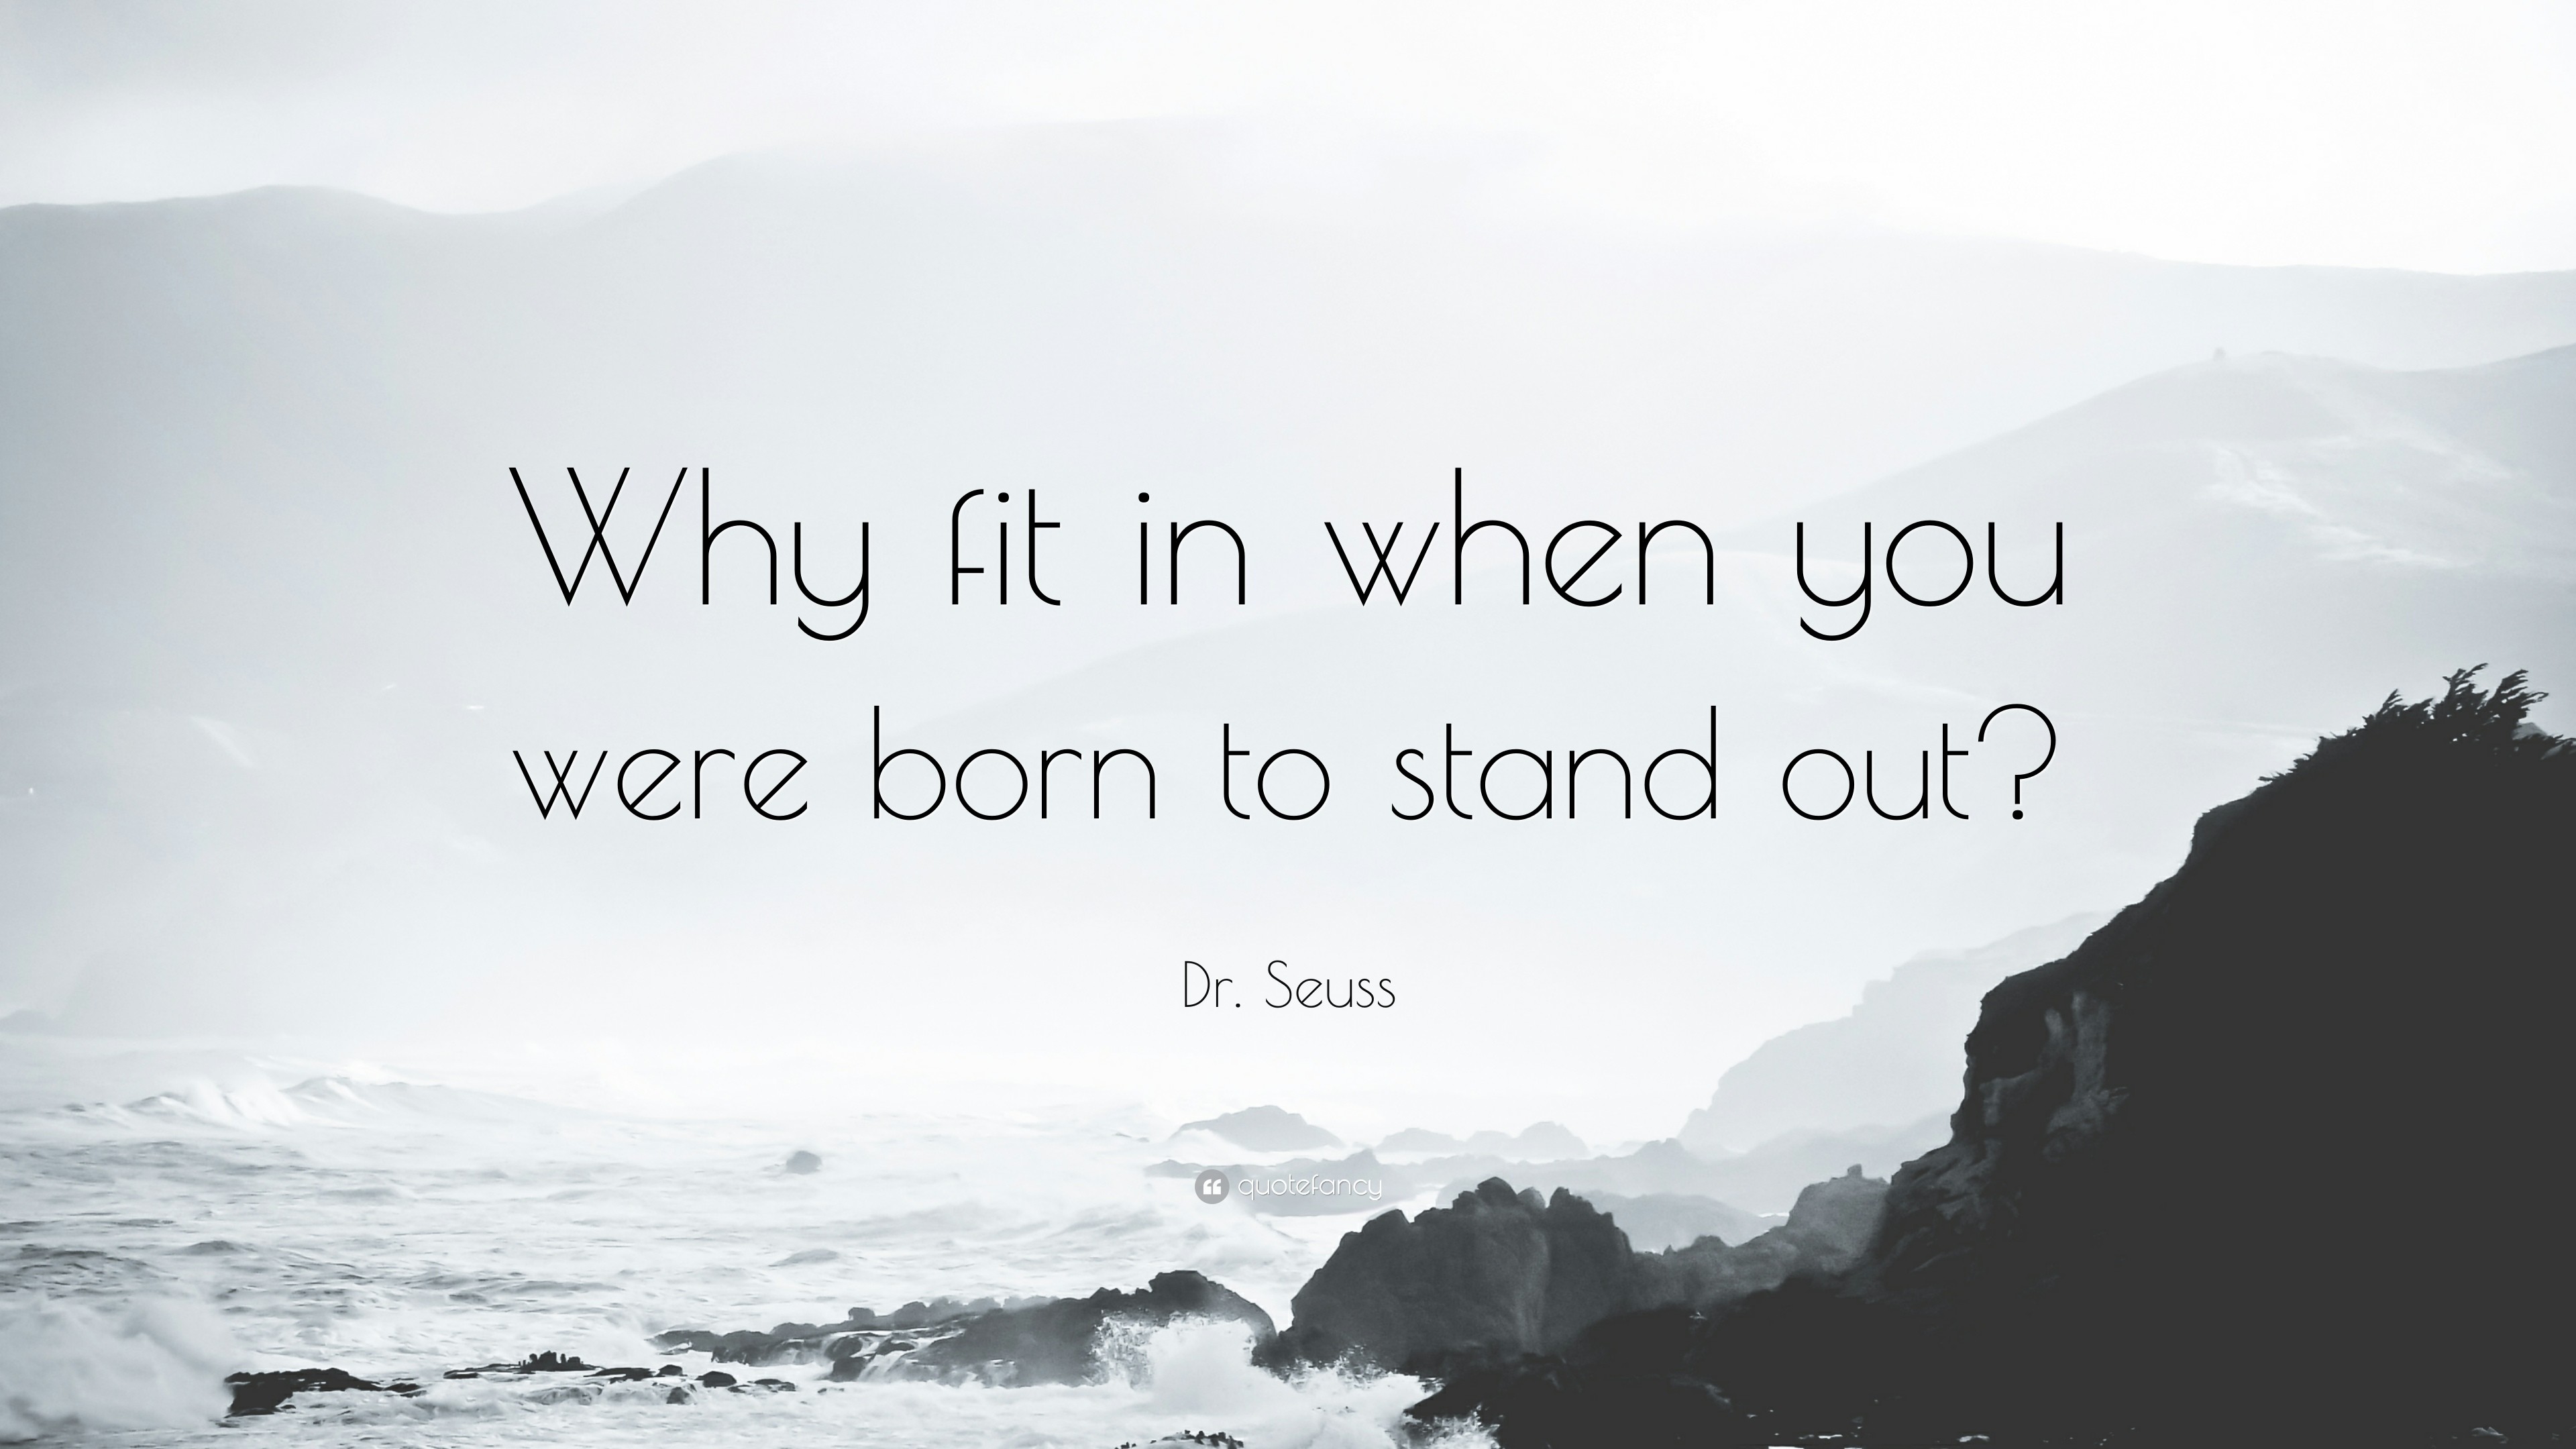 3840x2160 Dr. Seuss Quote: “Why fit in when you were born to stand out